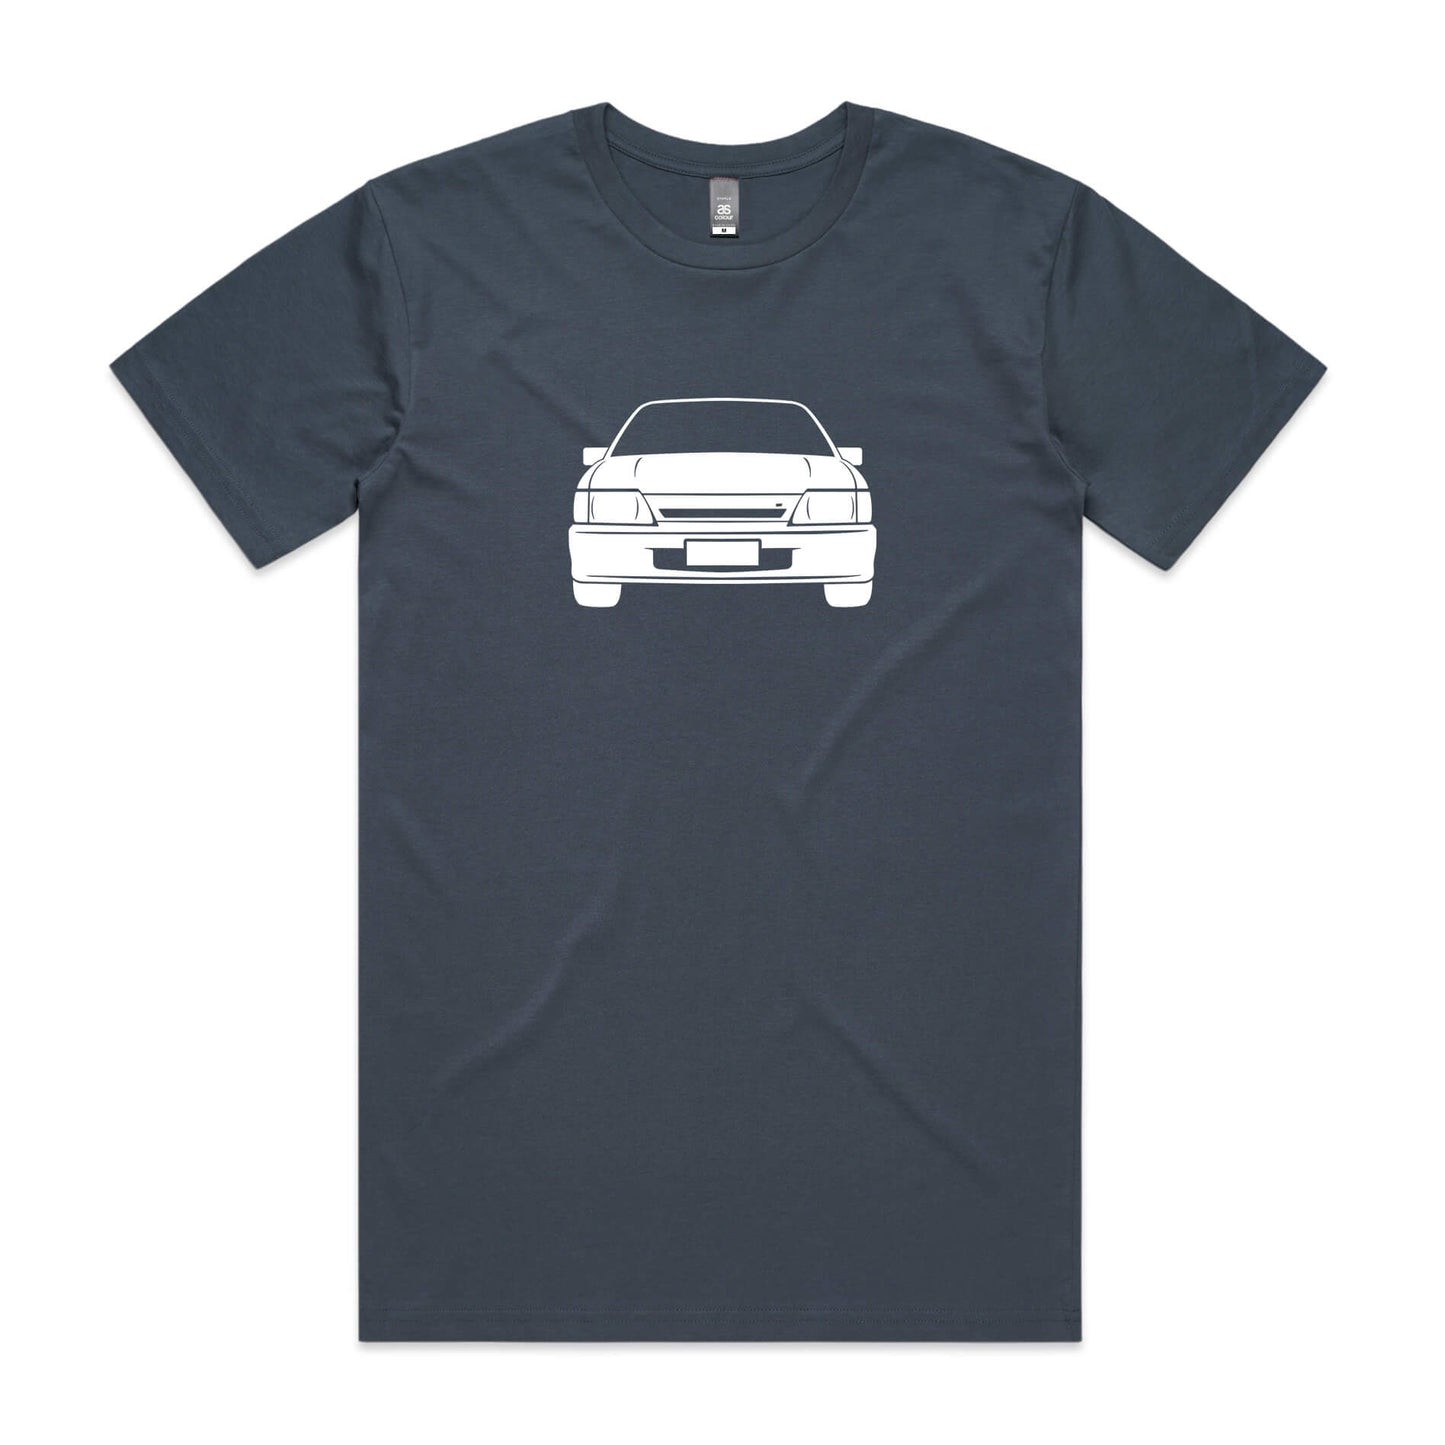 Holden VK Commodore t-shirt in Petrol with white car graphic